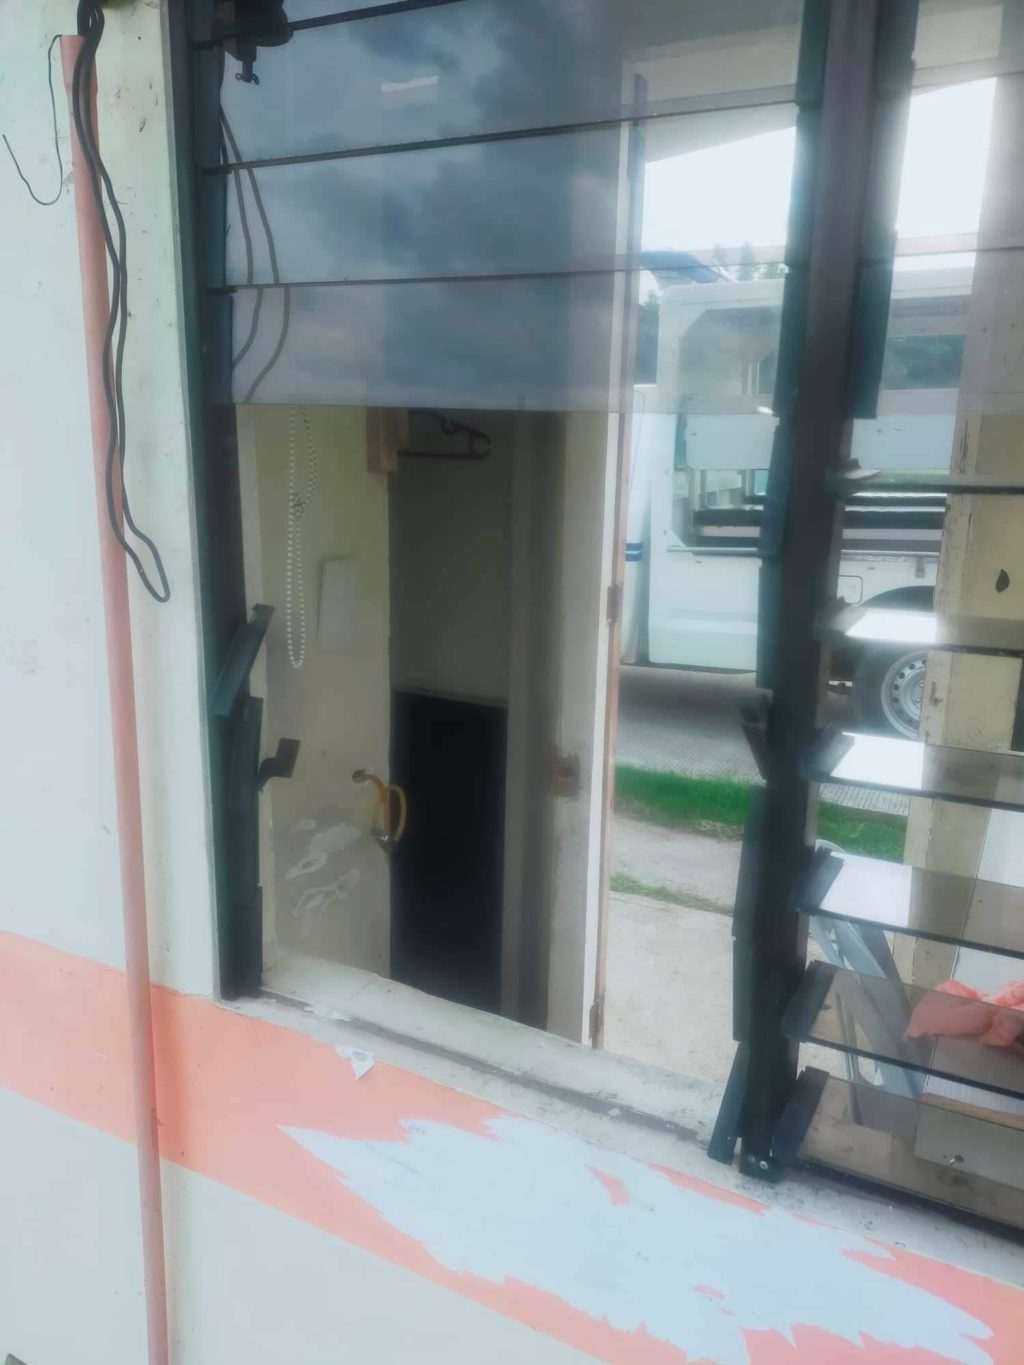 The suspects entered from the window of a comfort room connecting the school's guardhouse. | Photo courtesy of Cordova Police Station